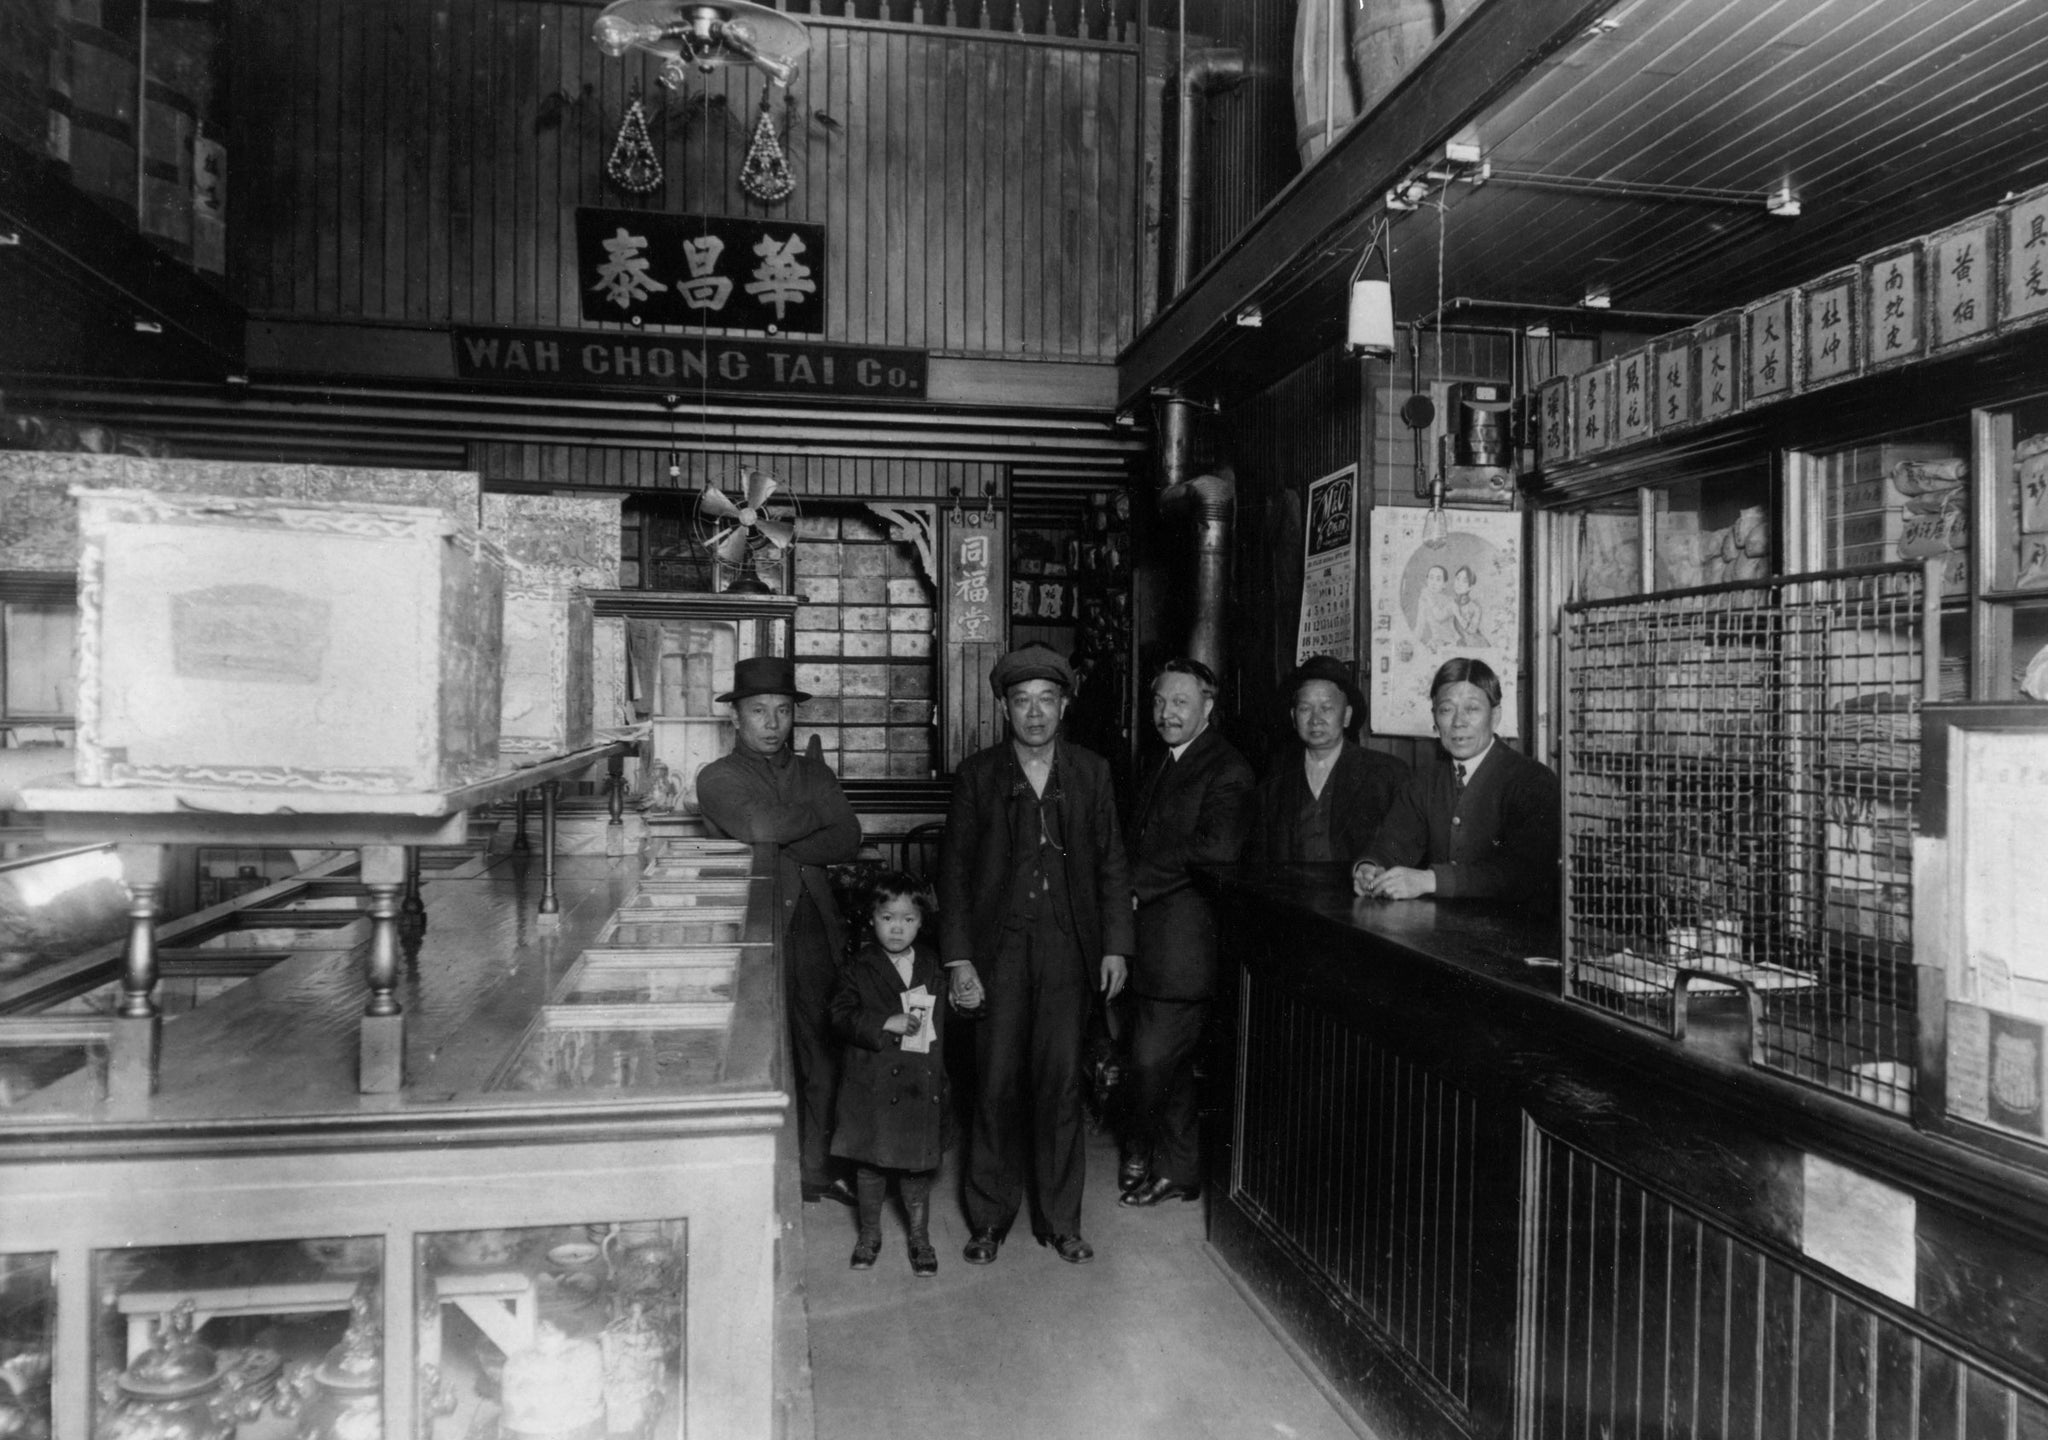 Interior view of the Wah Chong Tai Company, located at 15 West Mercury Street in Butte, circa 1905. -- Courtesy World Museum of Mining / #03179